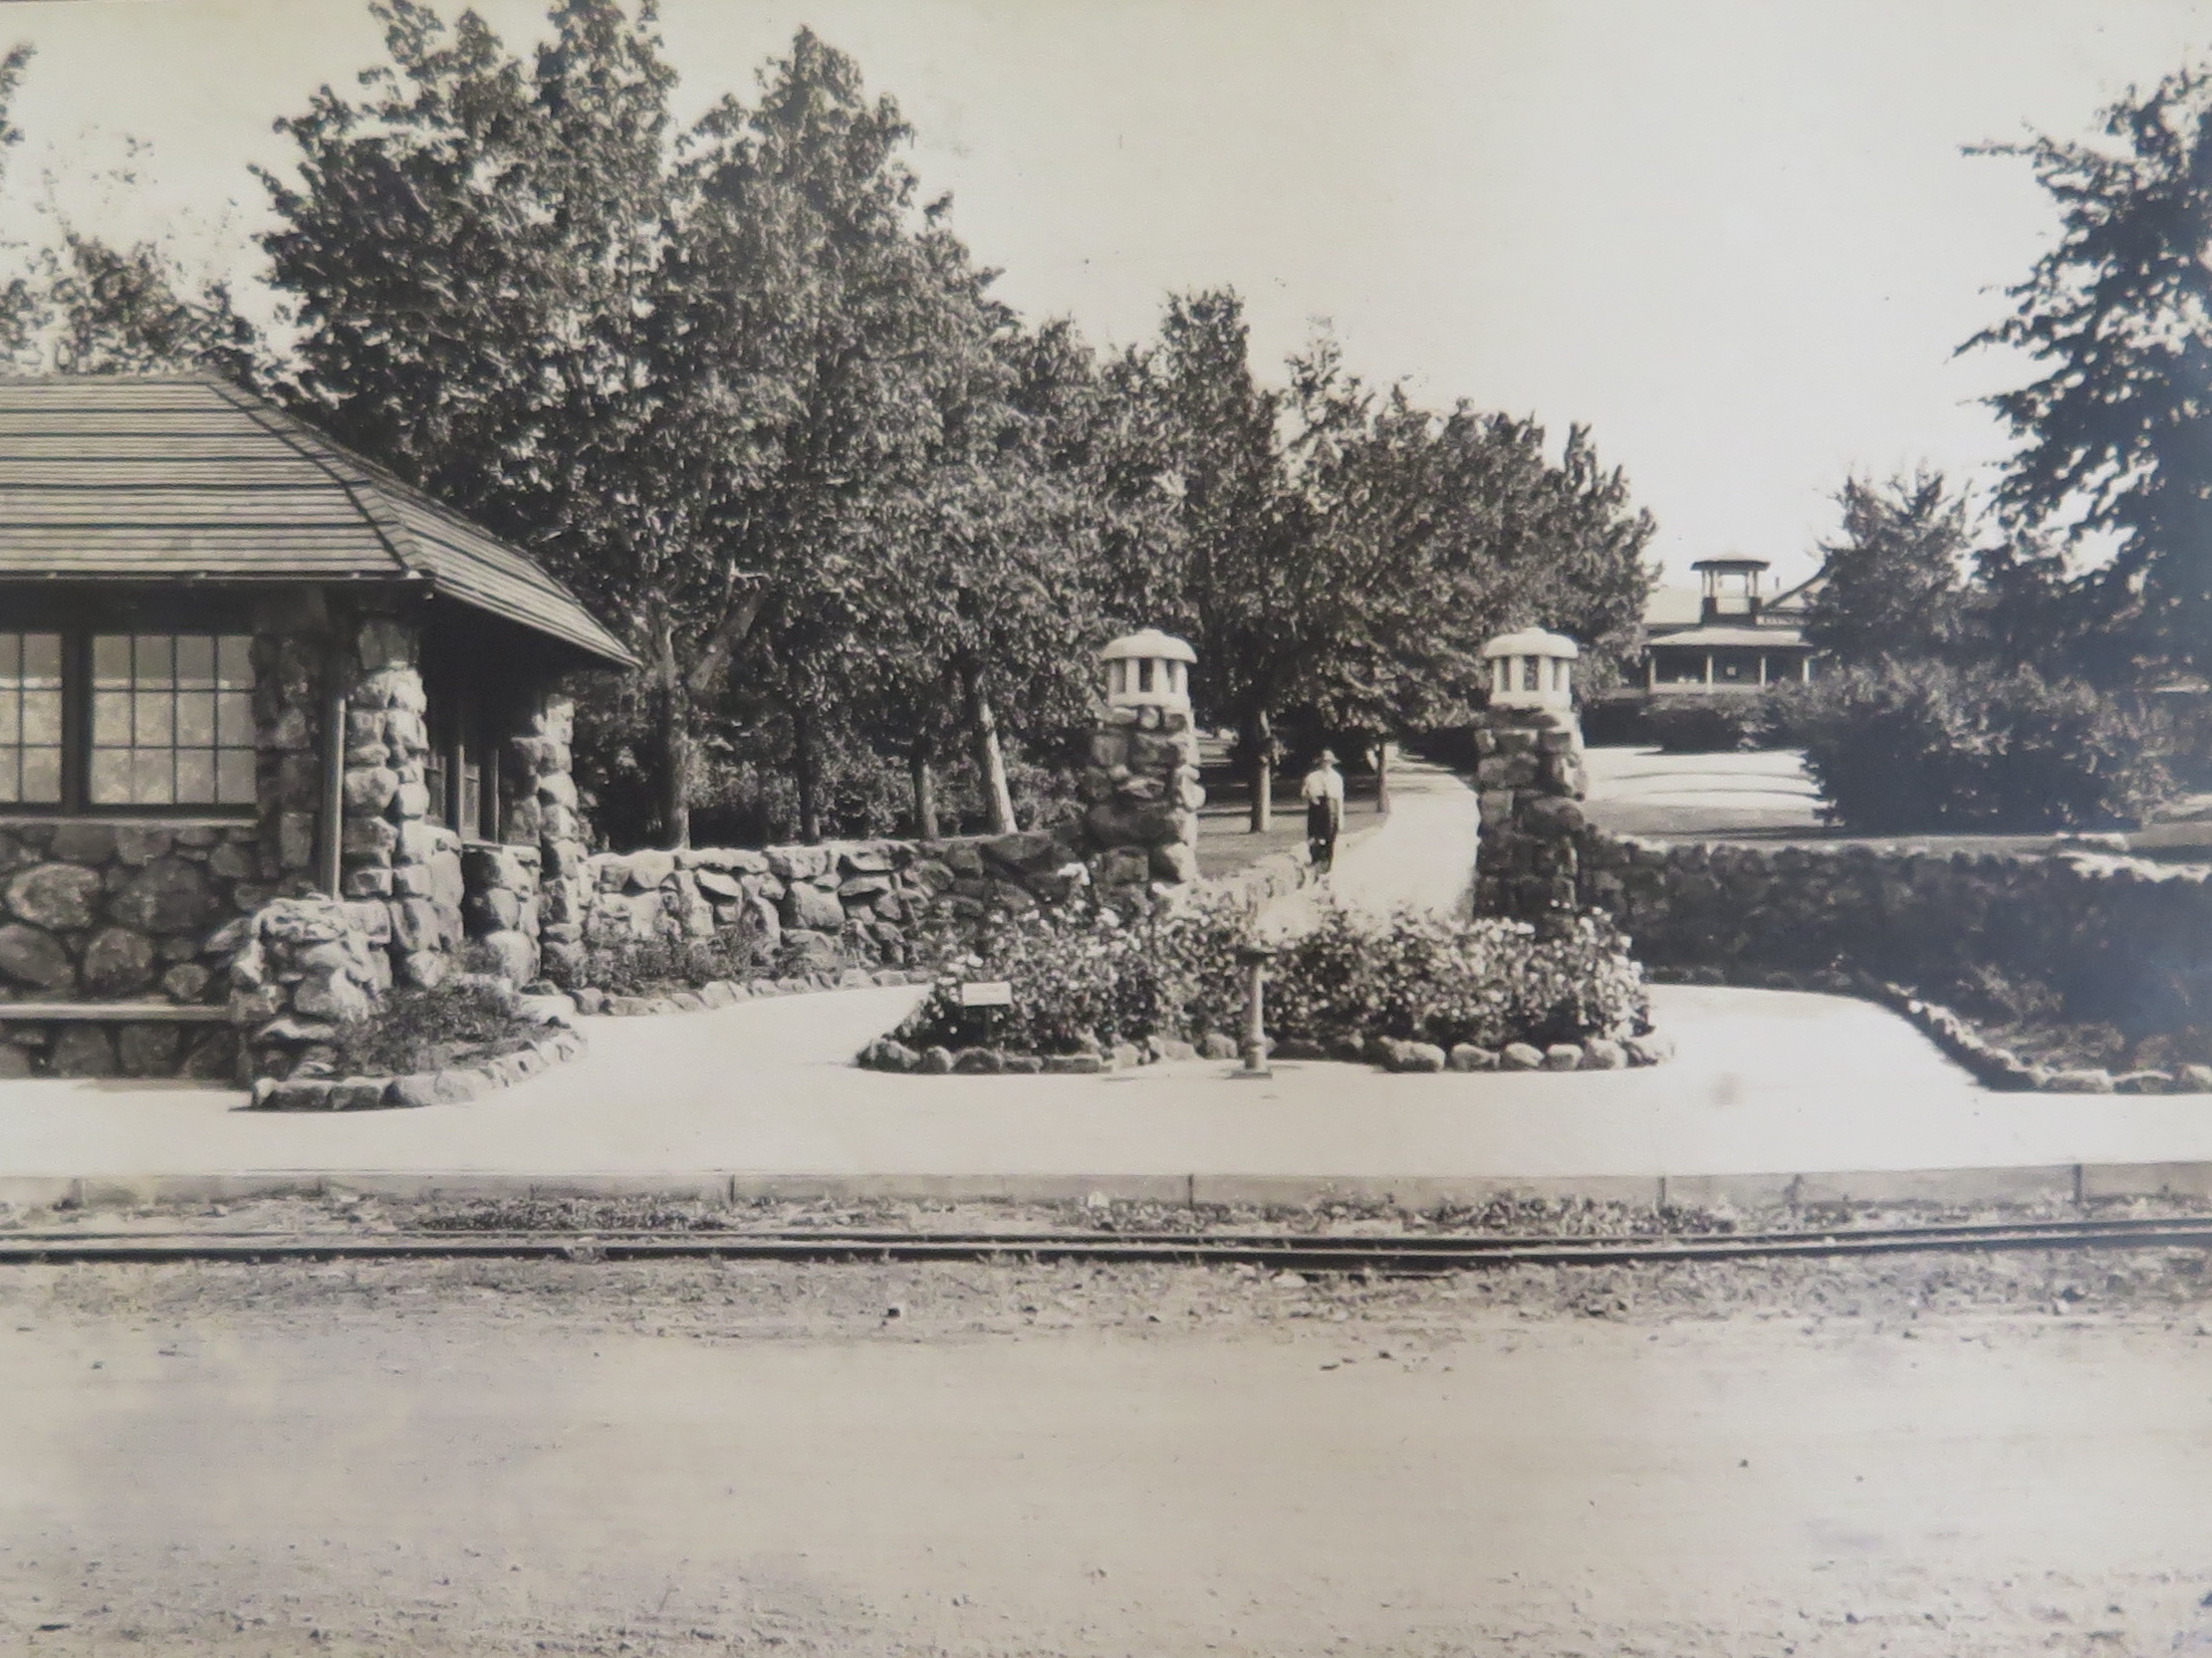 Photo of the entrance to a well-kept property. A small stone structure with large paned windows is on the left. From that building, a low stone wall emerges then curves outward, becoming an entrance marked by 2 pillars on each side. The wall continues off to the right side of the image. There is a small, low flower bed before the entrance, and someone can be seen along the walkway in the distance. A building with a tower and groomed lawns with tall trees lie beyond the walls.